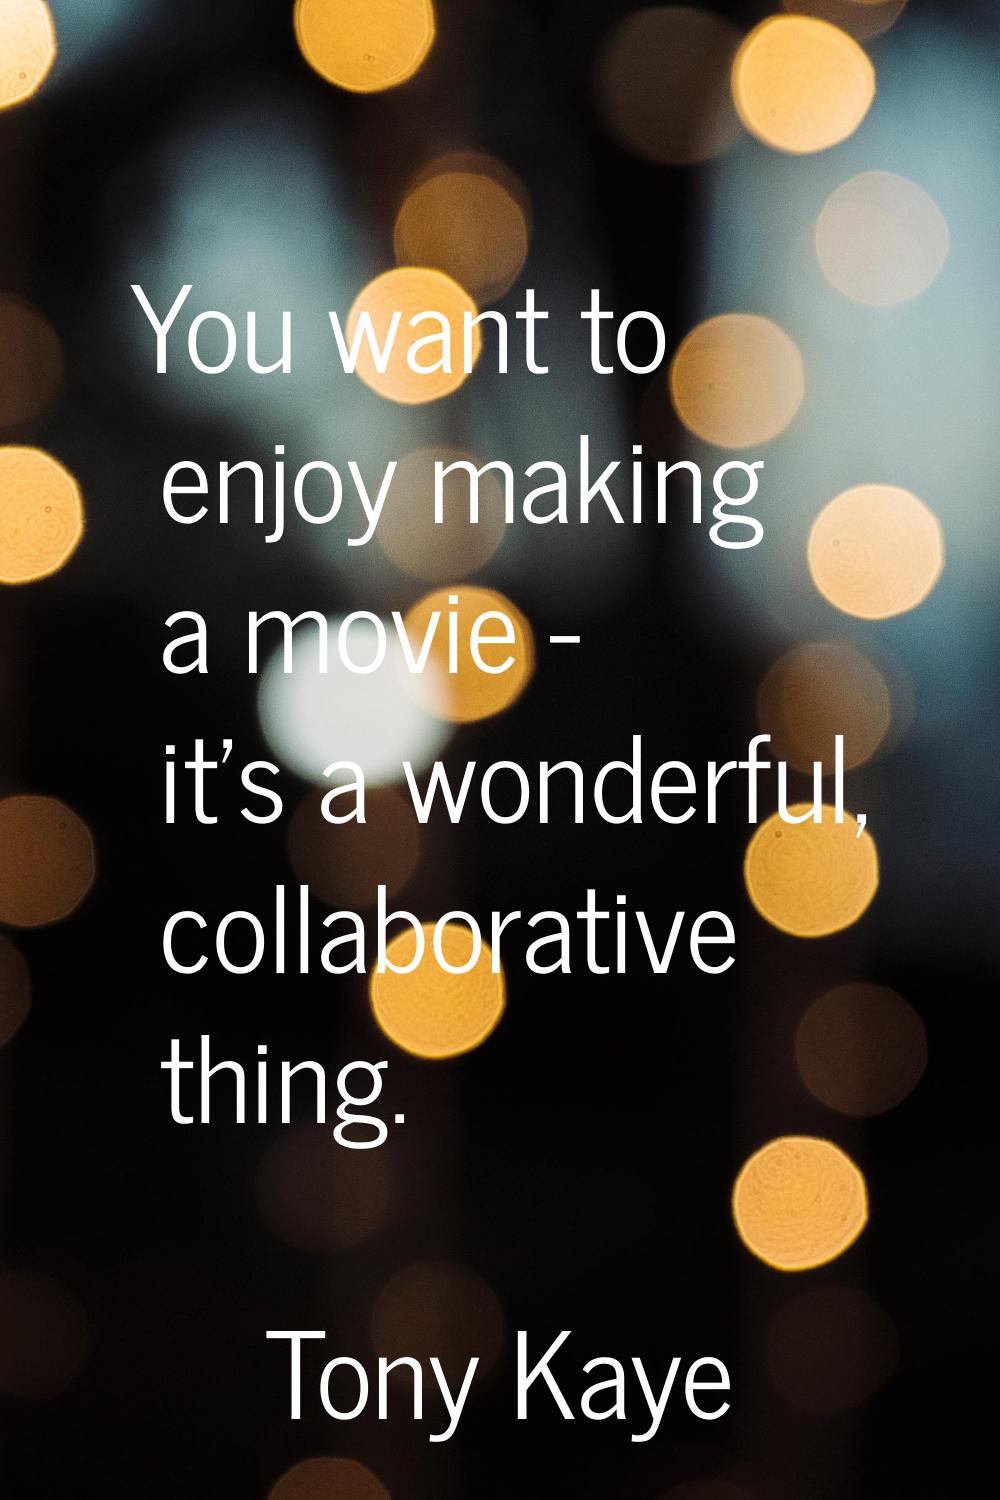 You want to enjoy making a movie - it's a wonderful, collaborative thing.